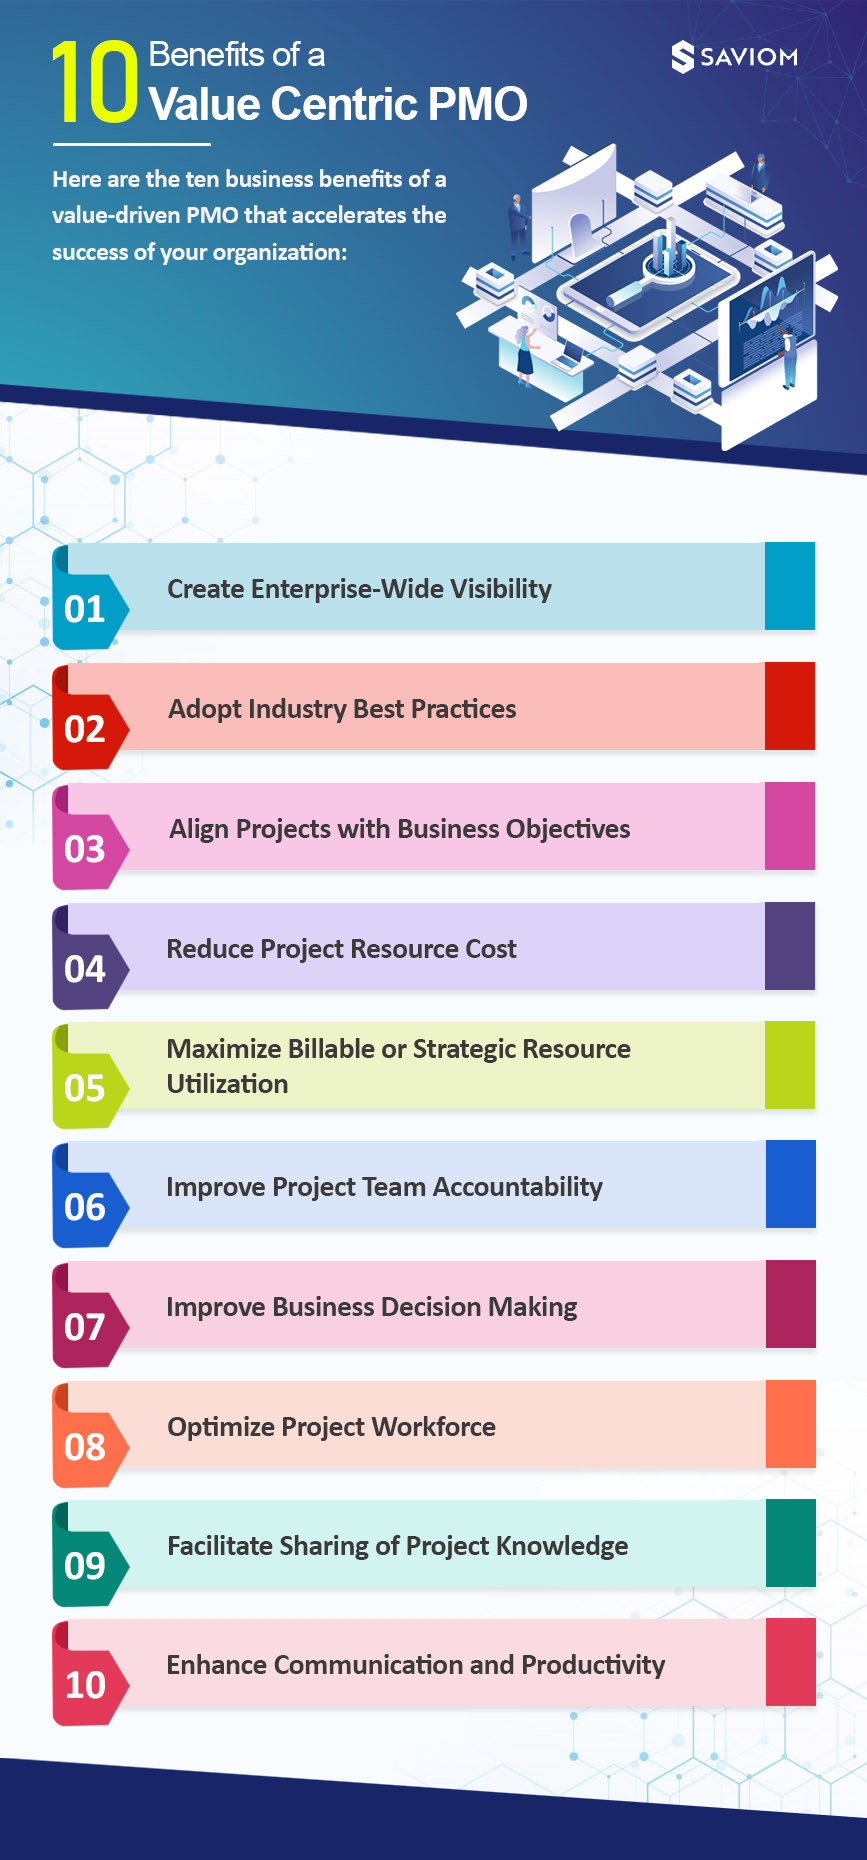 Top 10 Business Benefits of a Value Centric PMO- Infographic